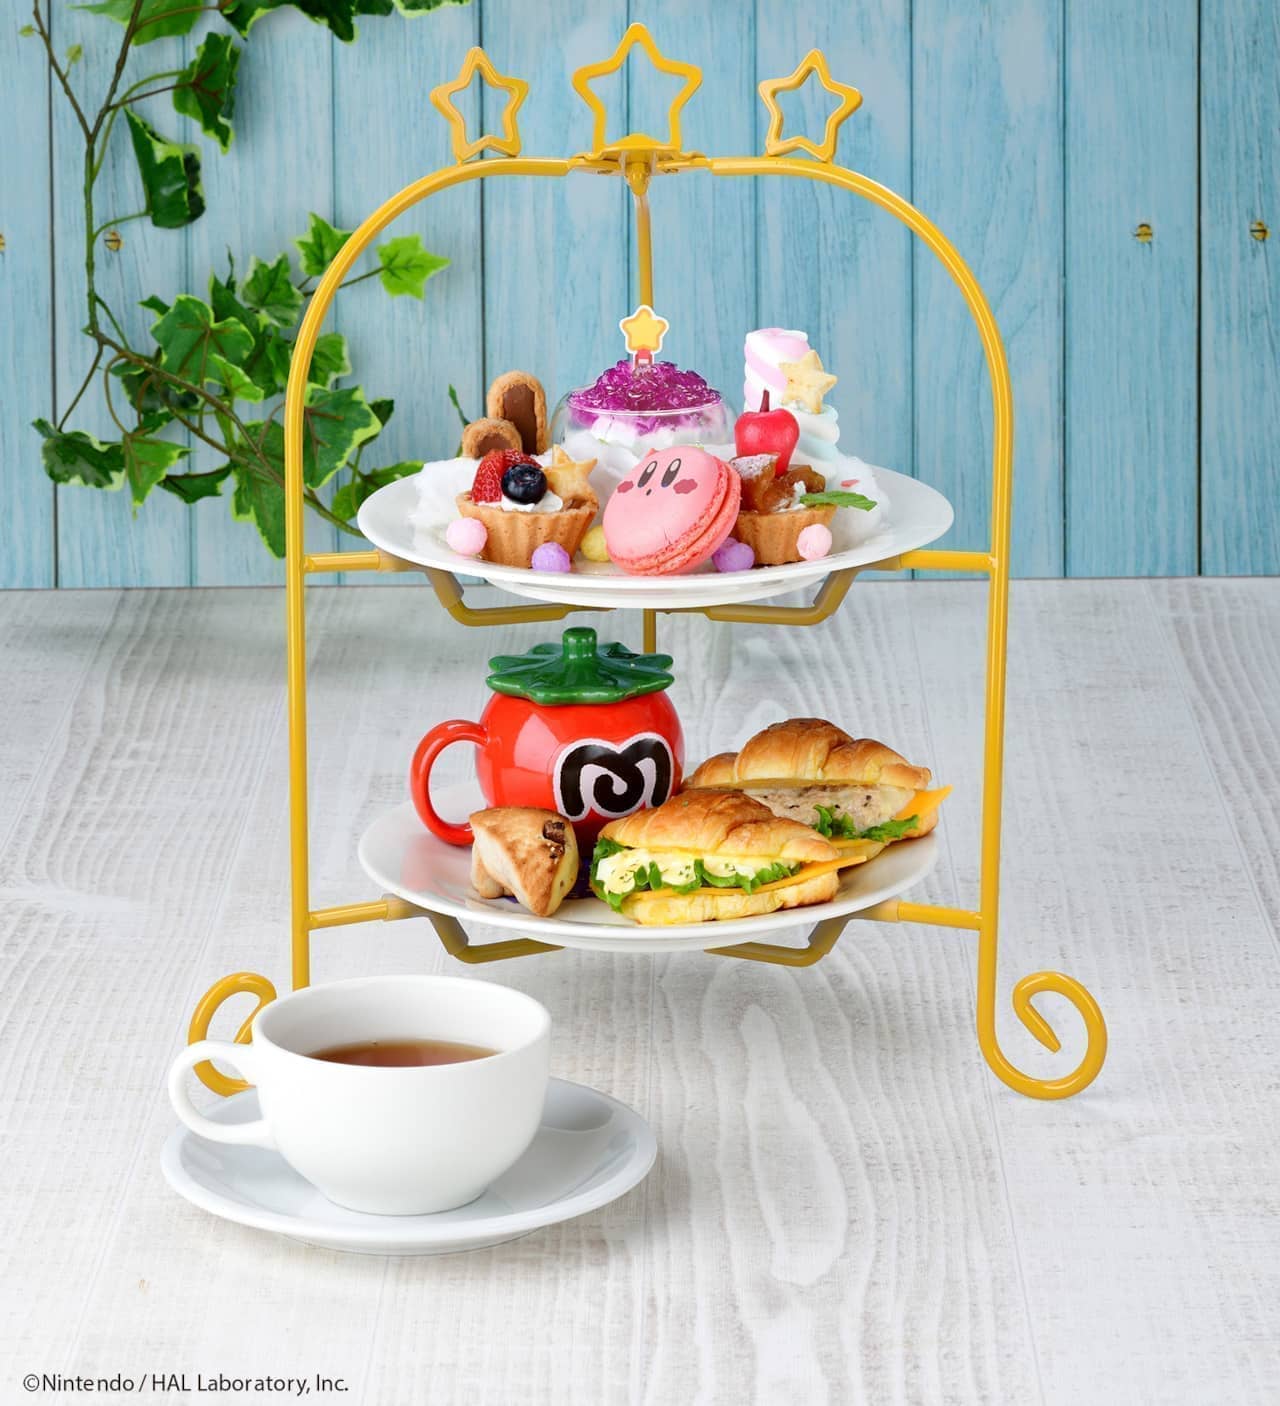 Kirby Cafe "Fountain of Dreams Afternoon Tea" for a limited time